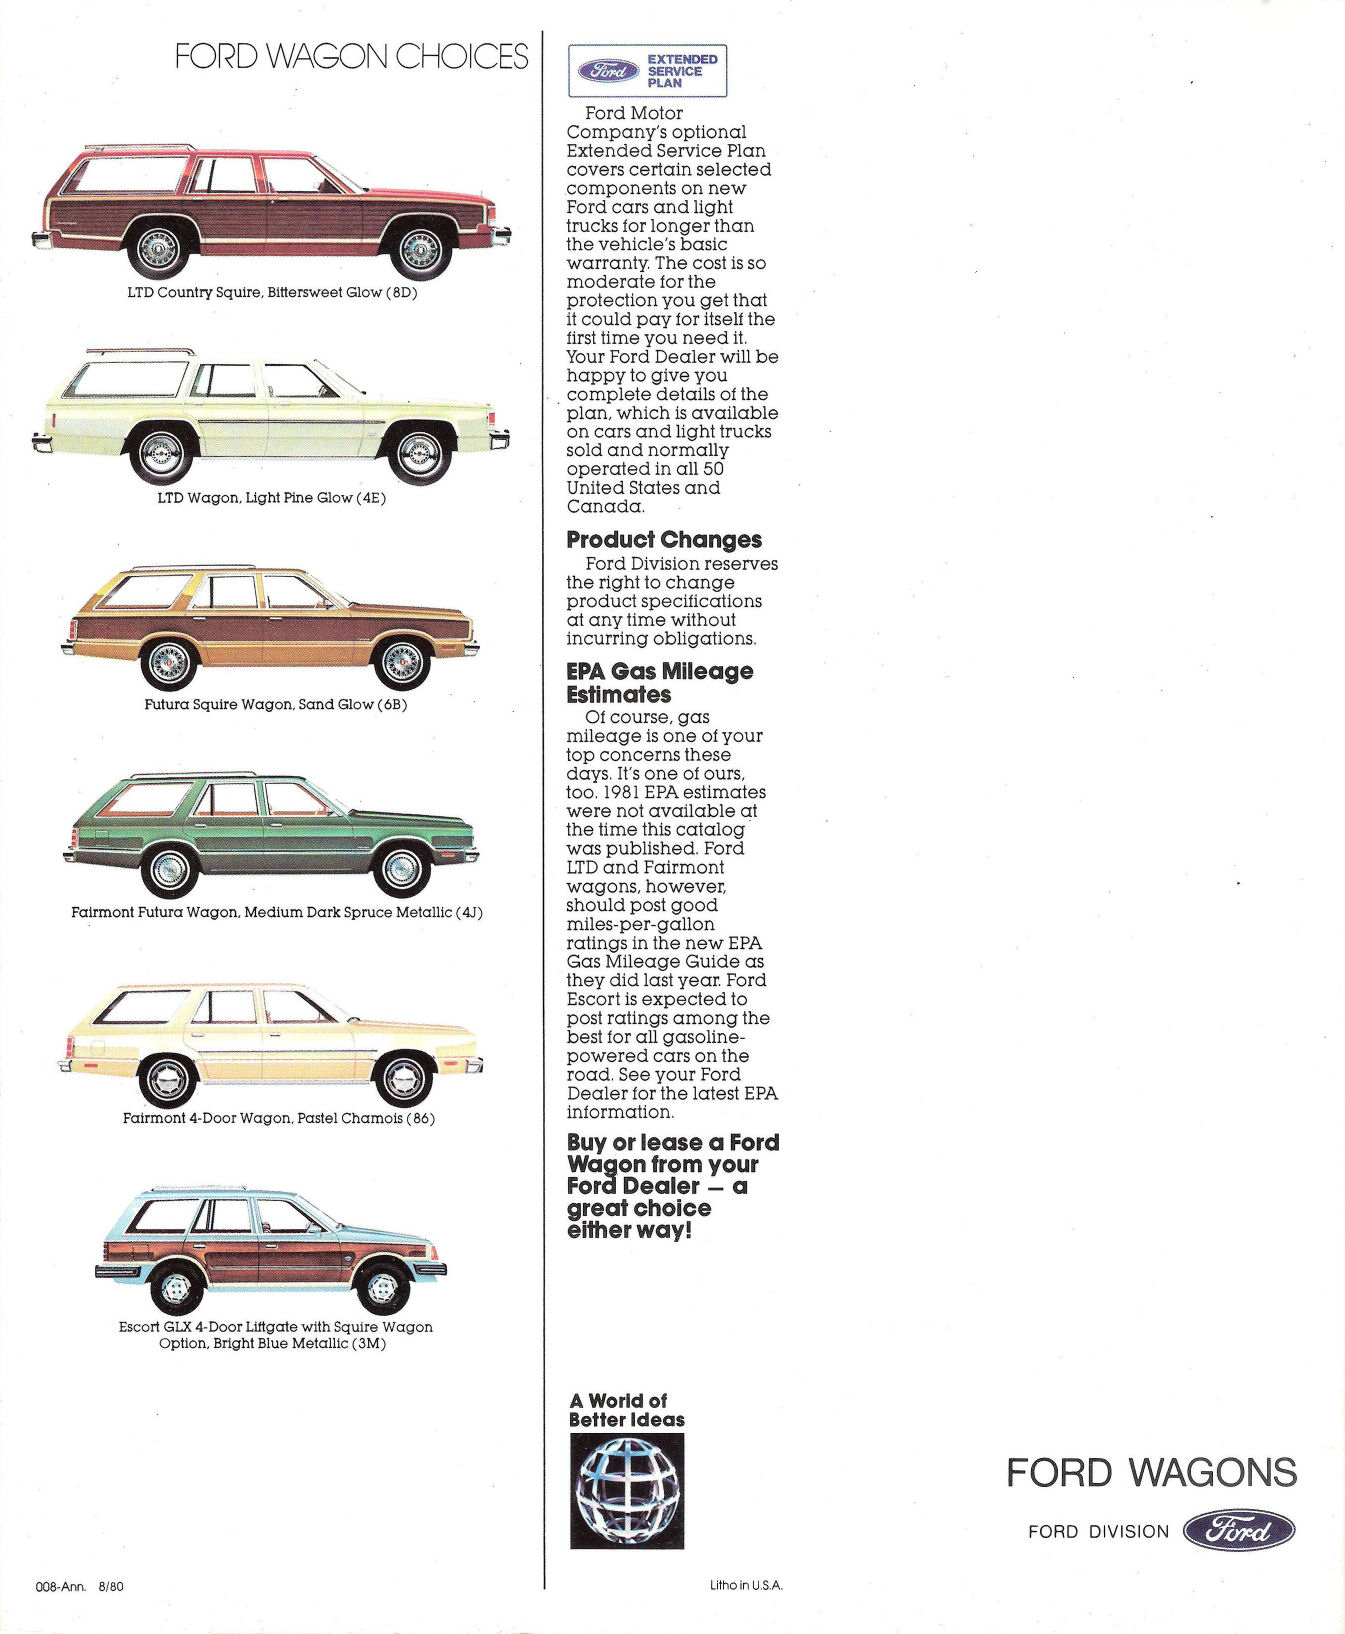 1981_Ford_Wagons_Foldout-06